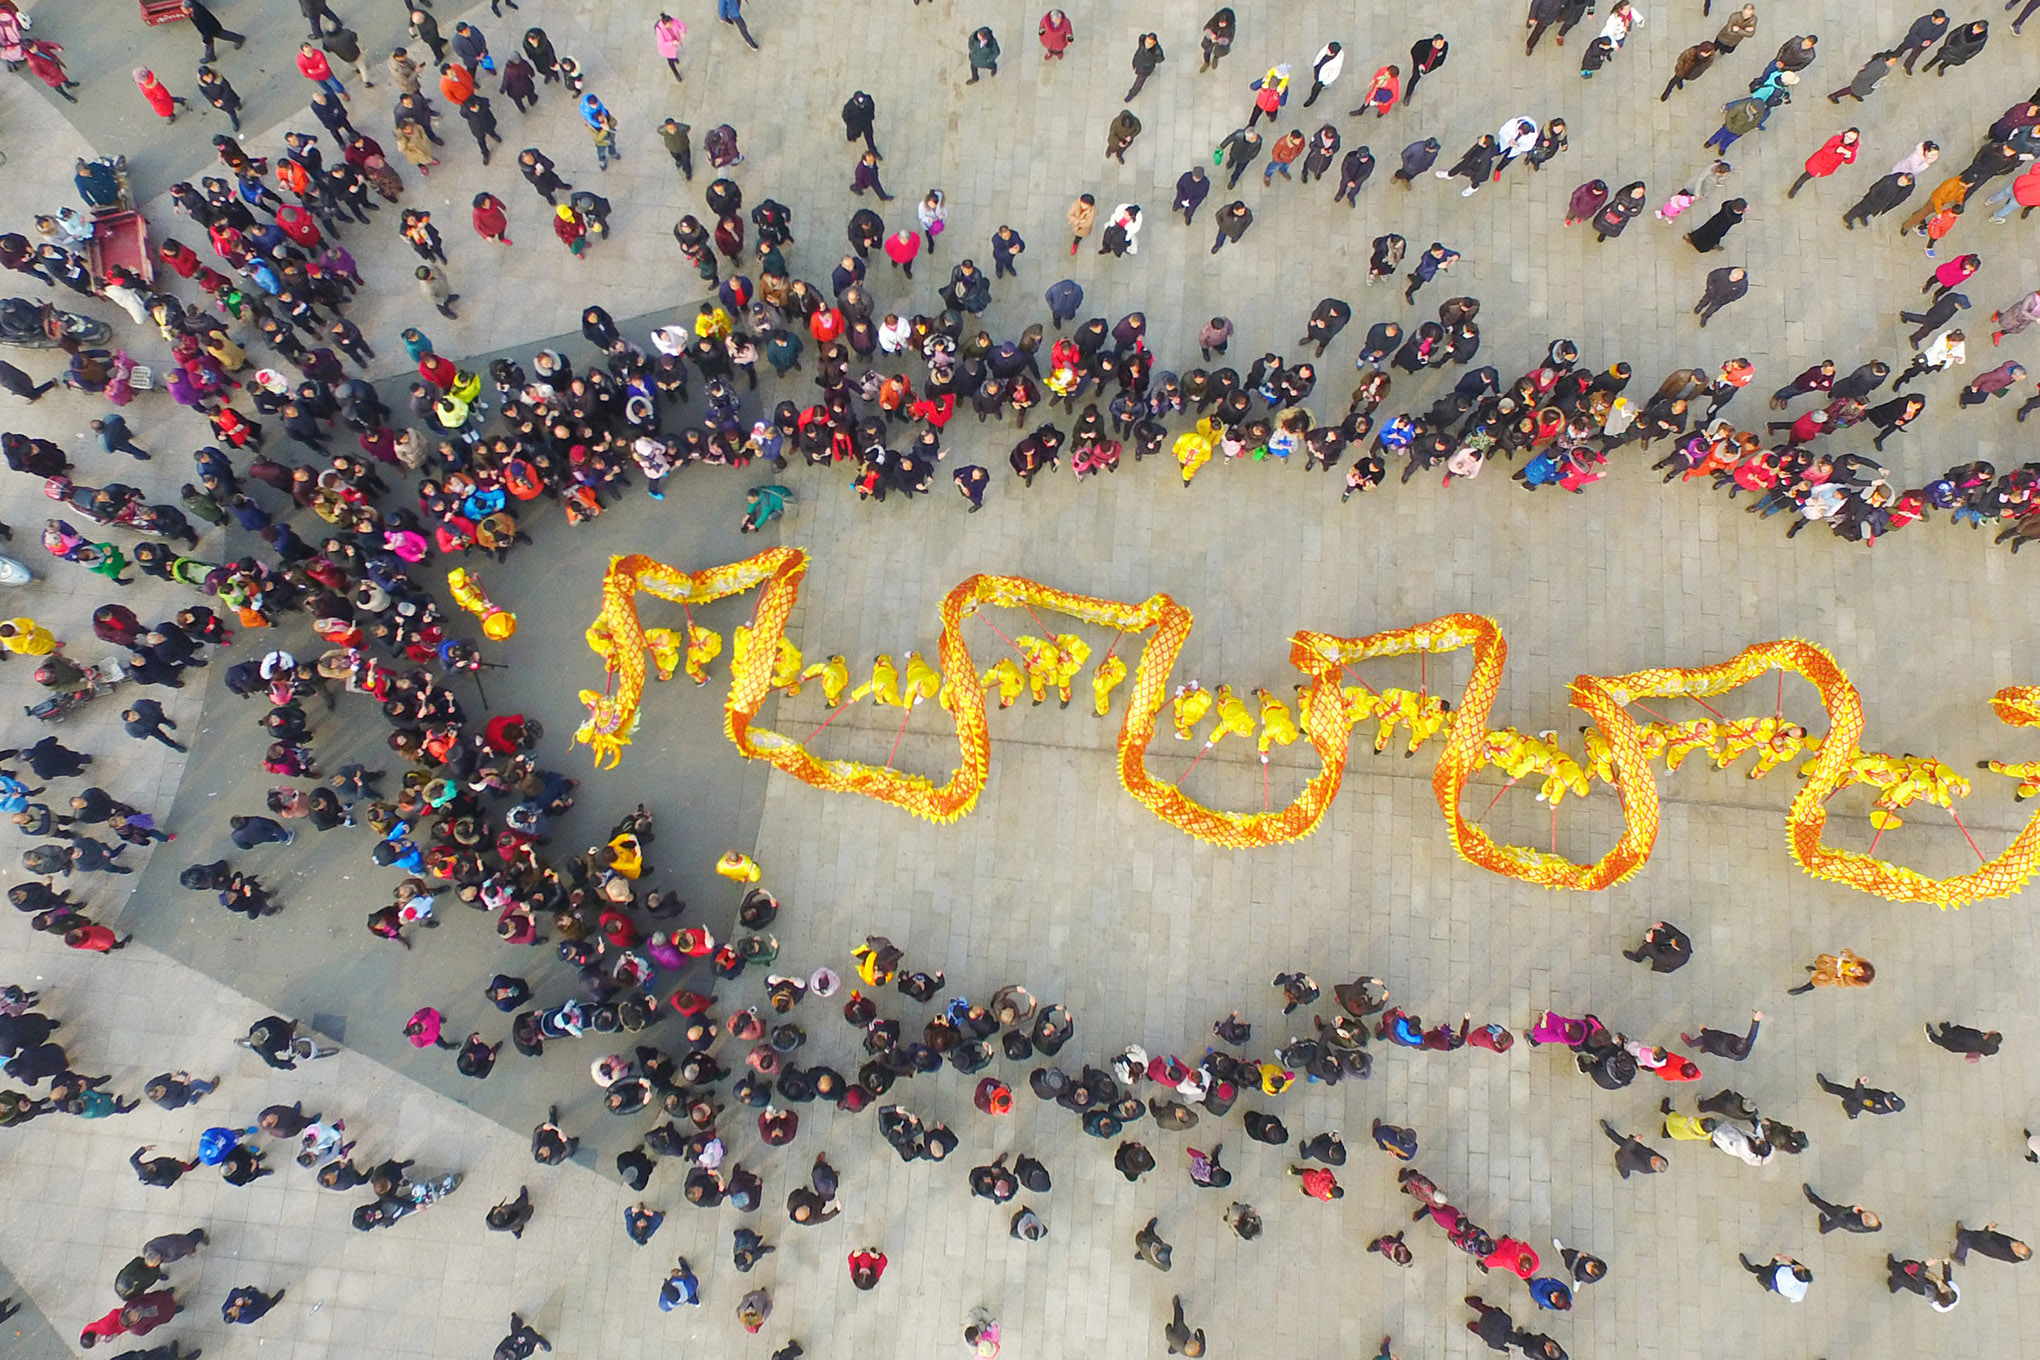 Aerial view of a large crowd watching dragon dance to welcome Lunar New Year on Feb. 16, 2018 in Chengdu, Sichuan Province of China.